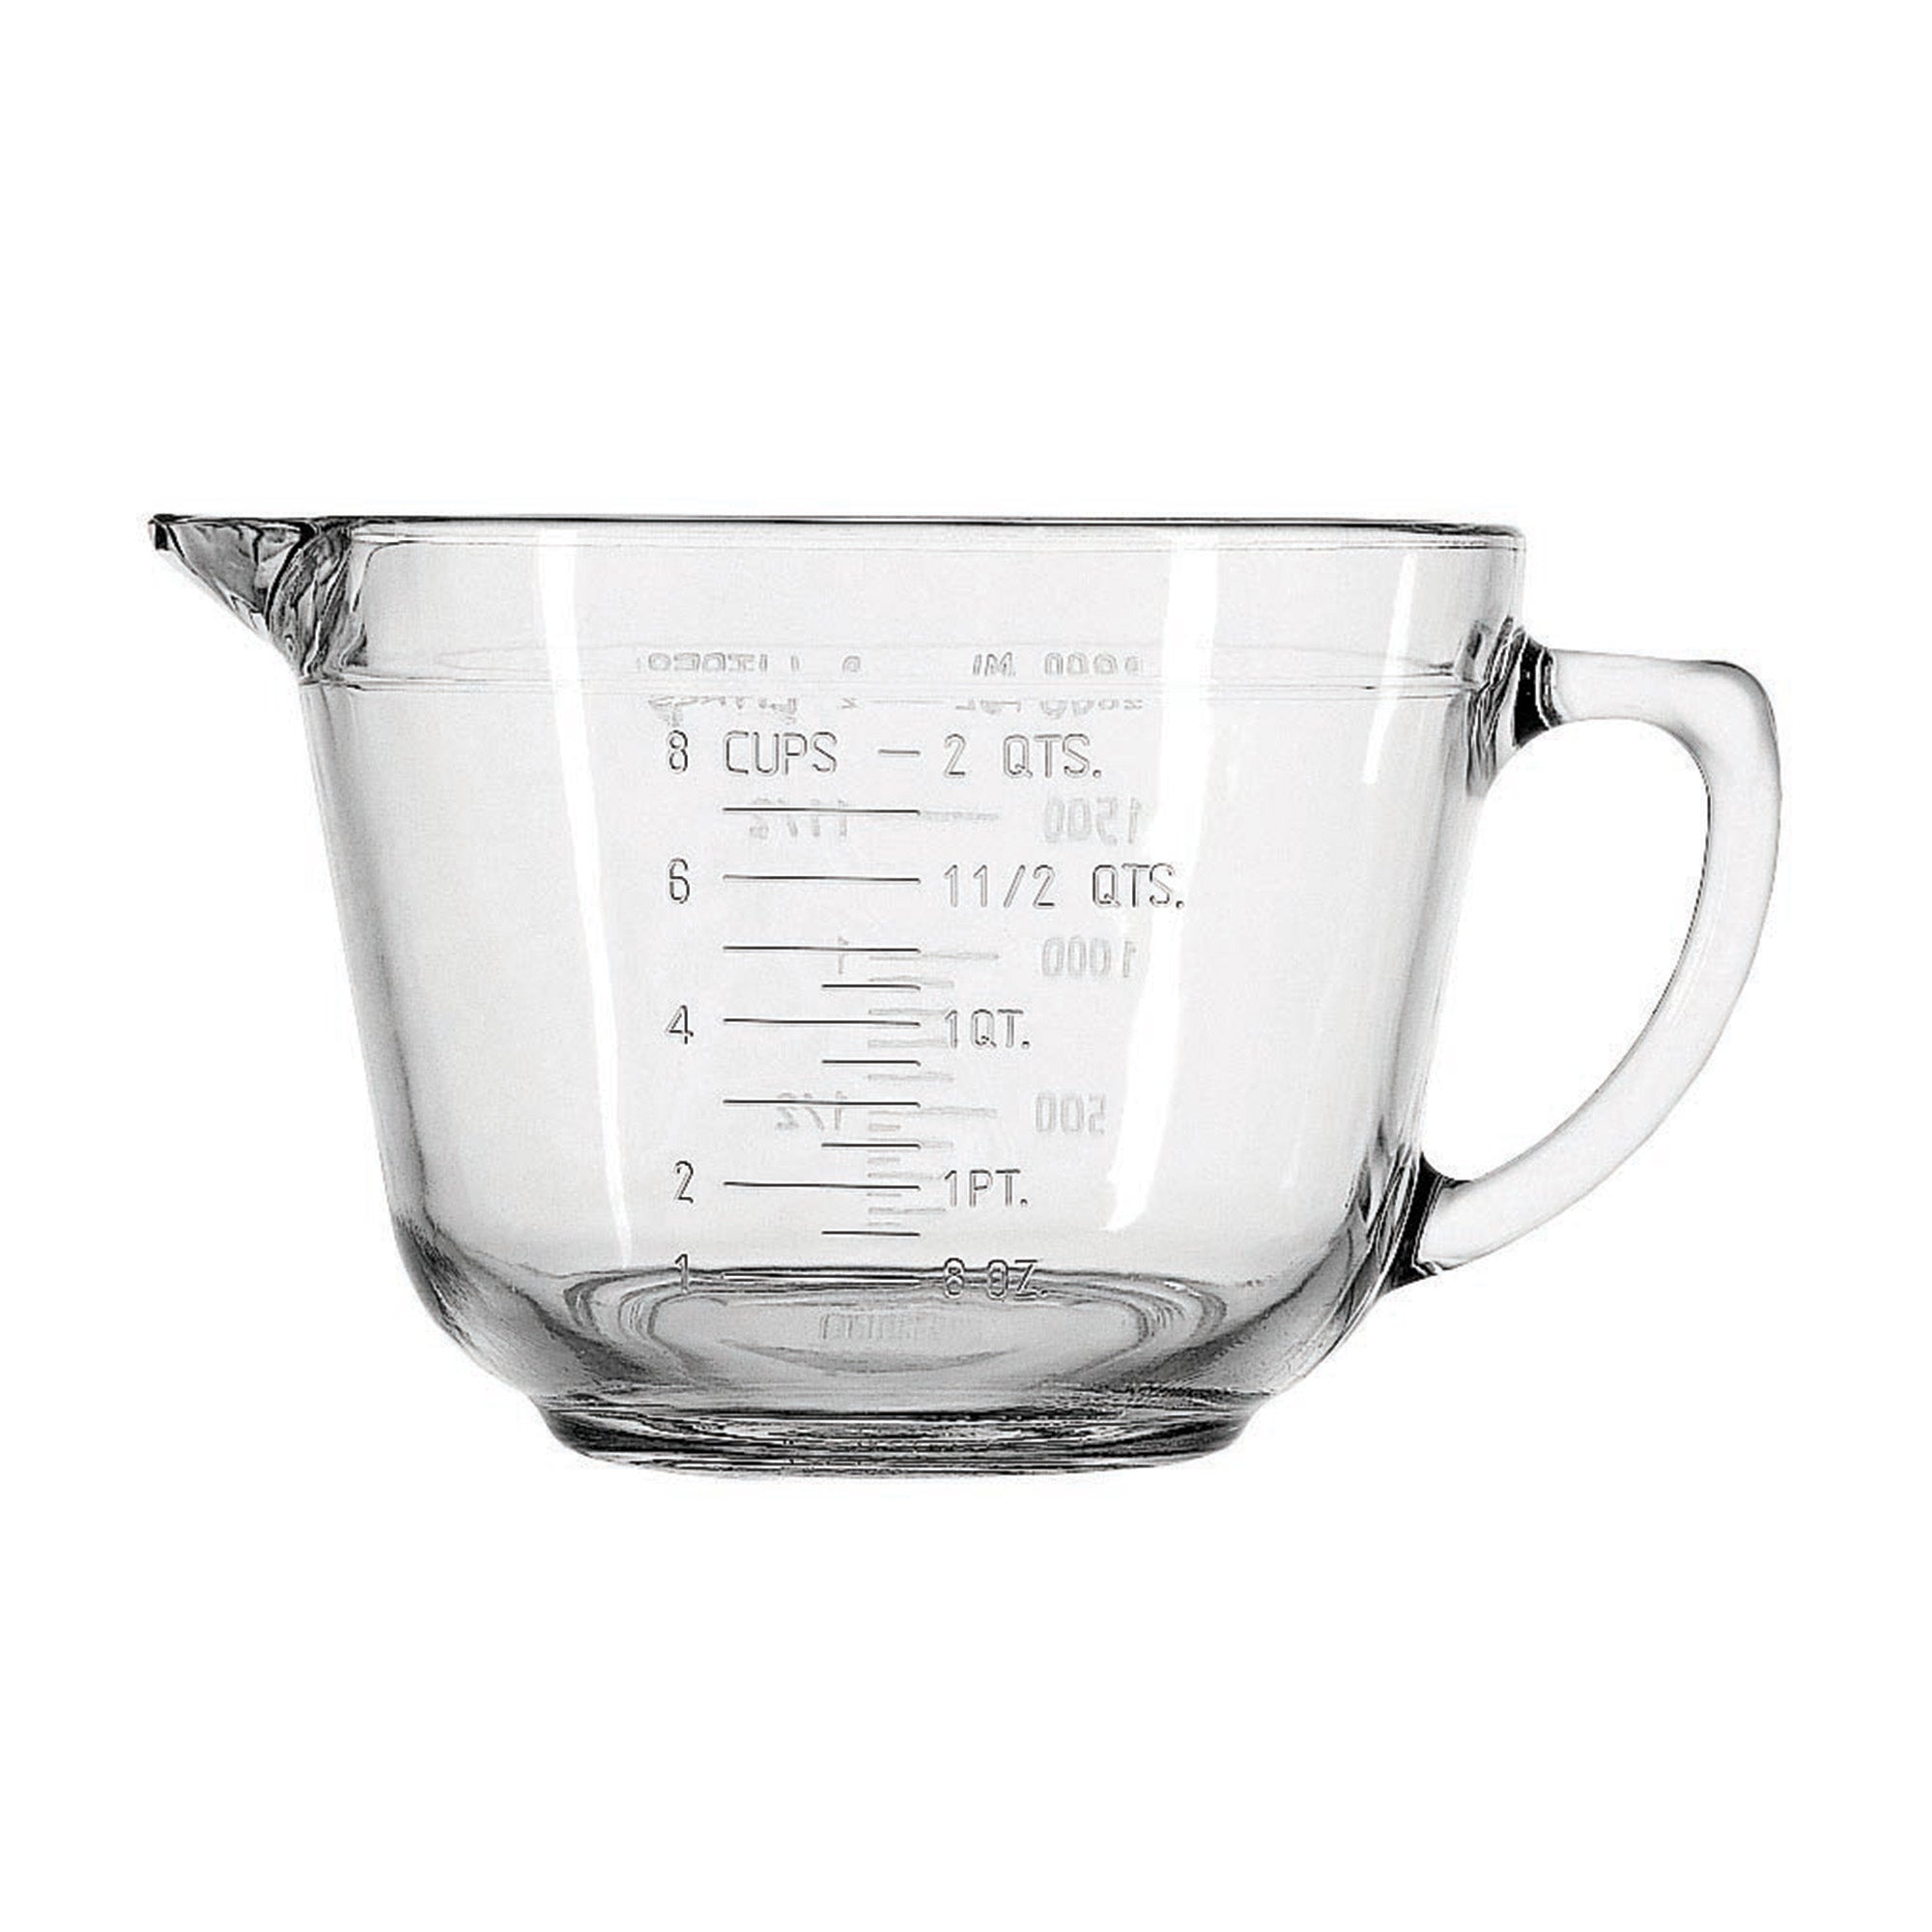 Measuring Cups: Stainless Steel & Plastic Measuring Cups